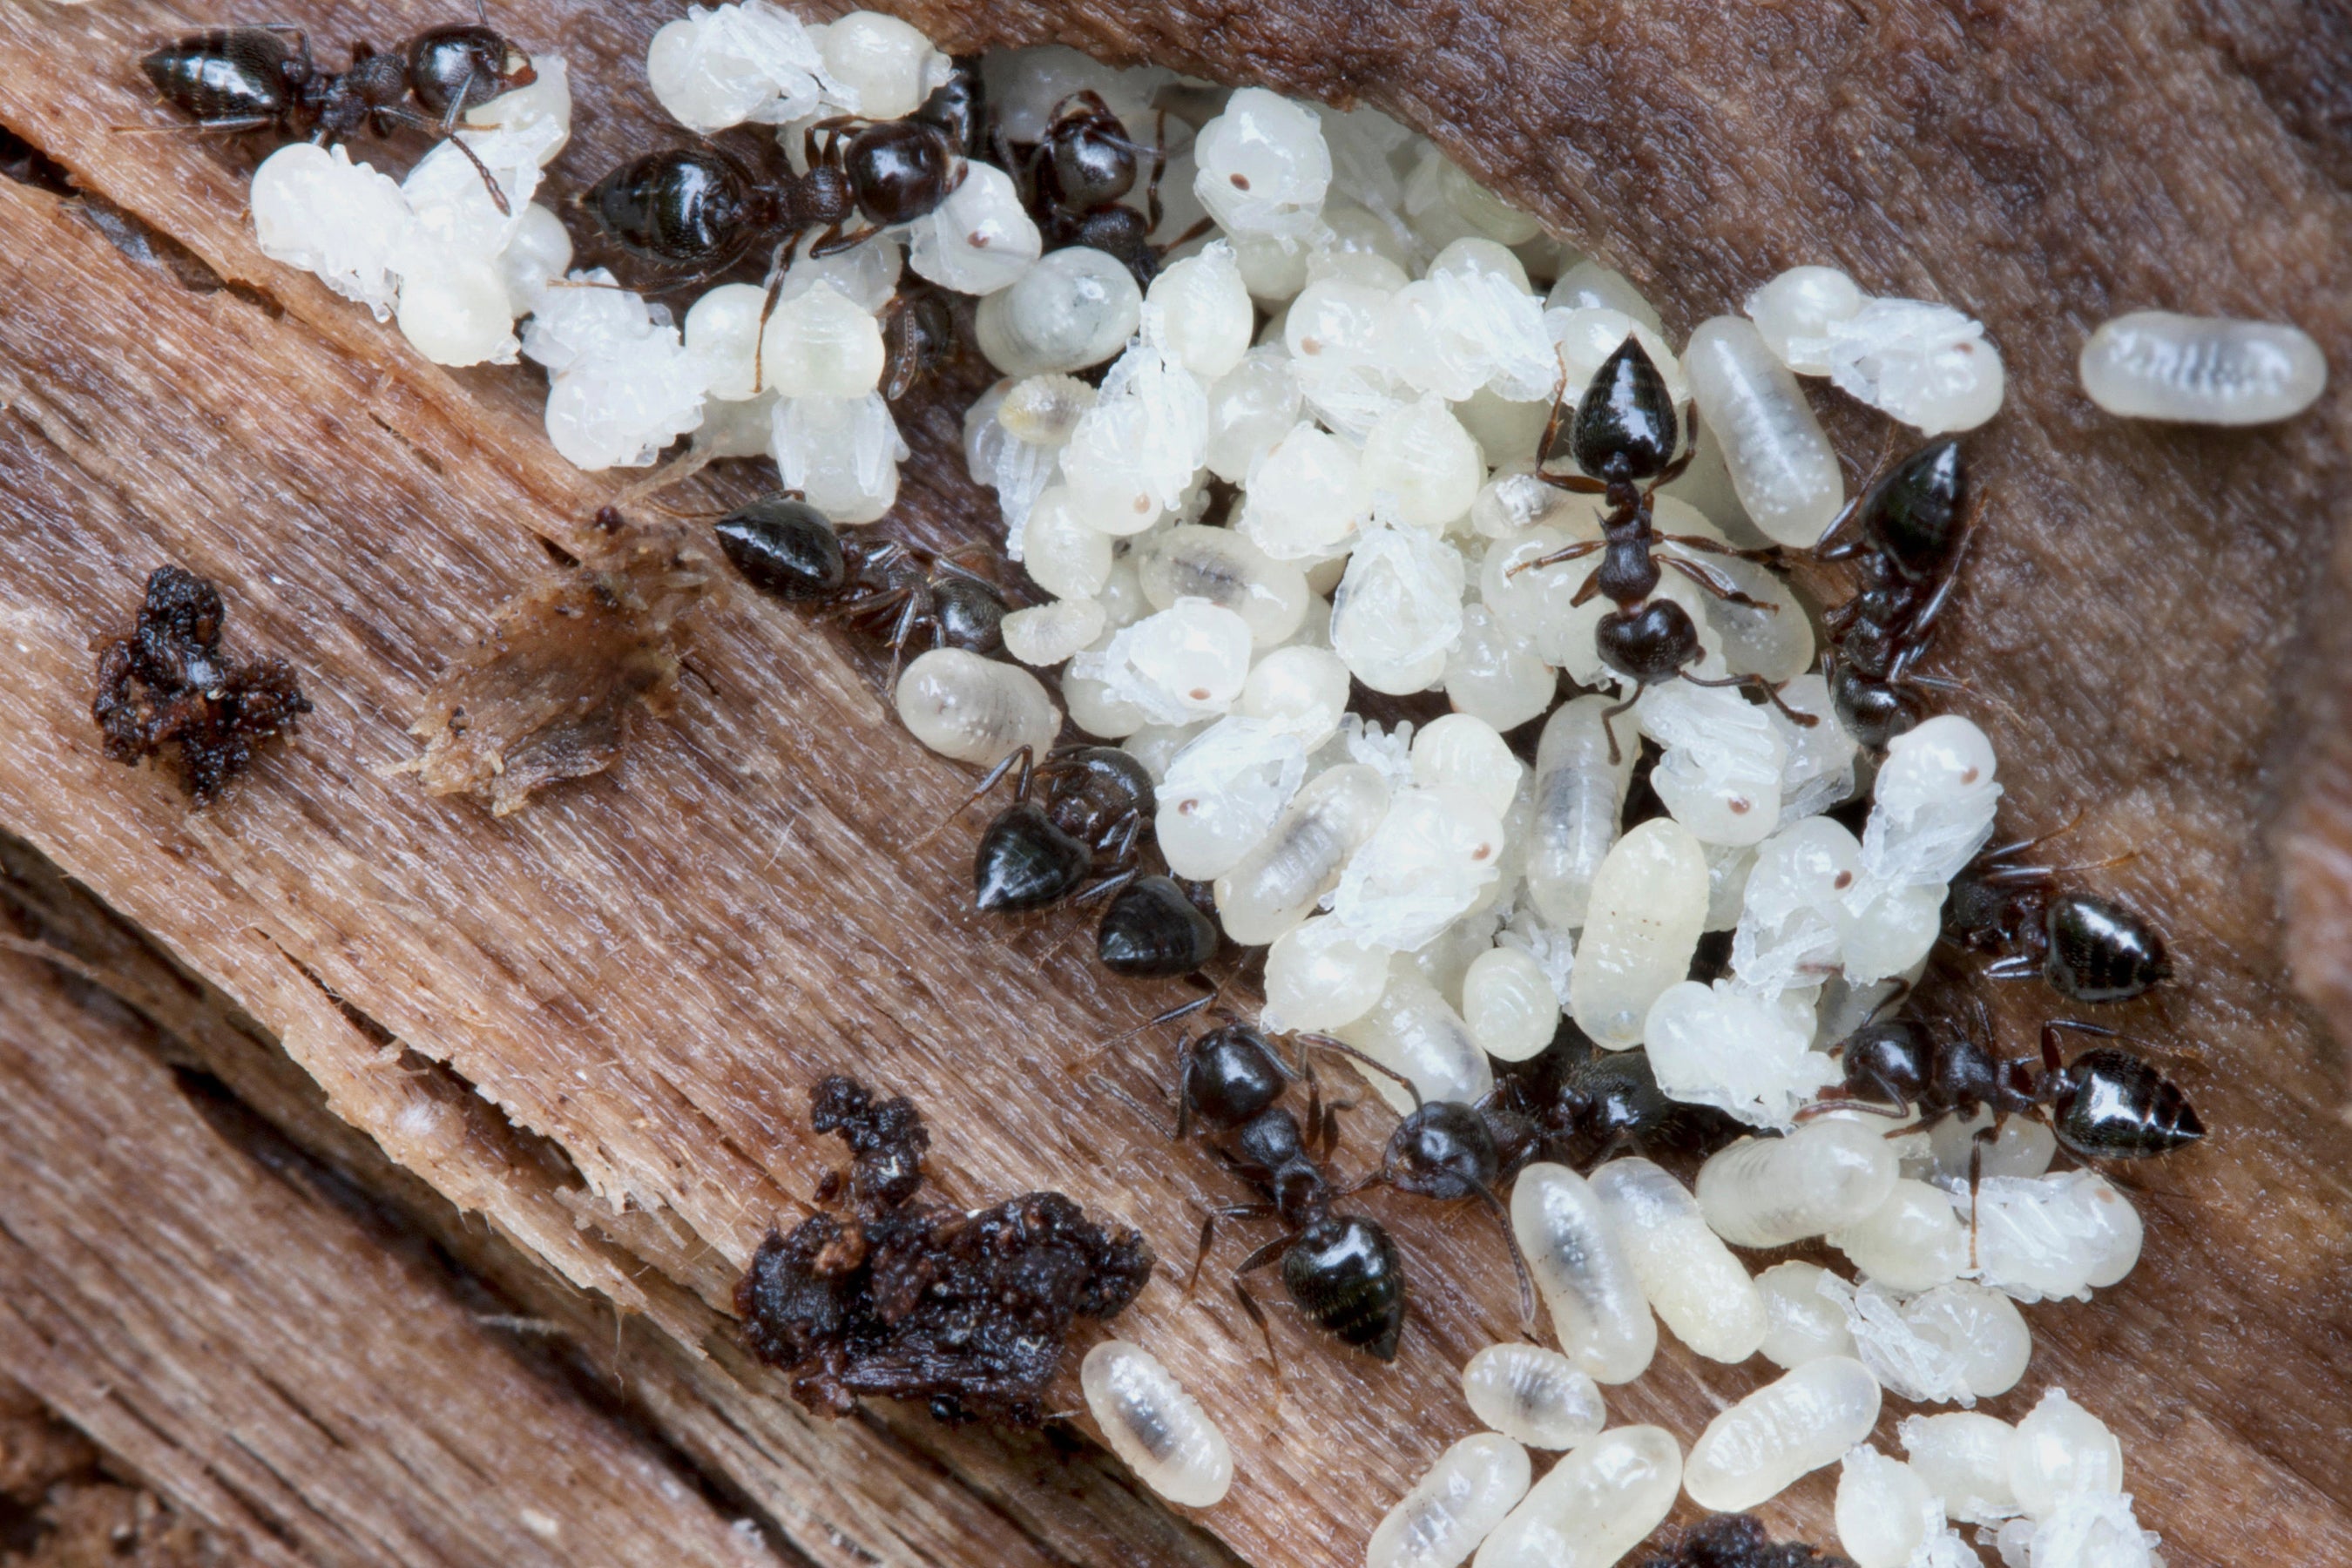 Ants Can Produce Milk for Their Young (and Old) - Scientific American